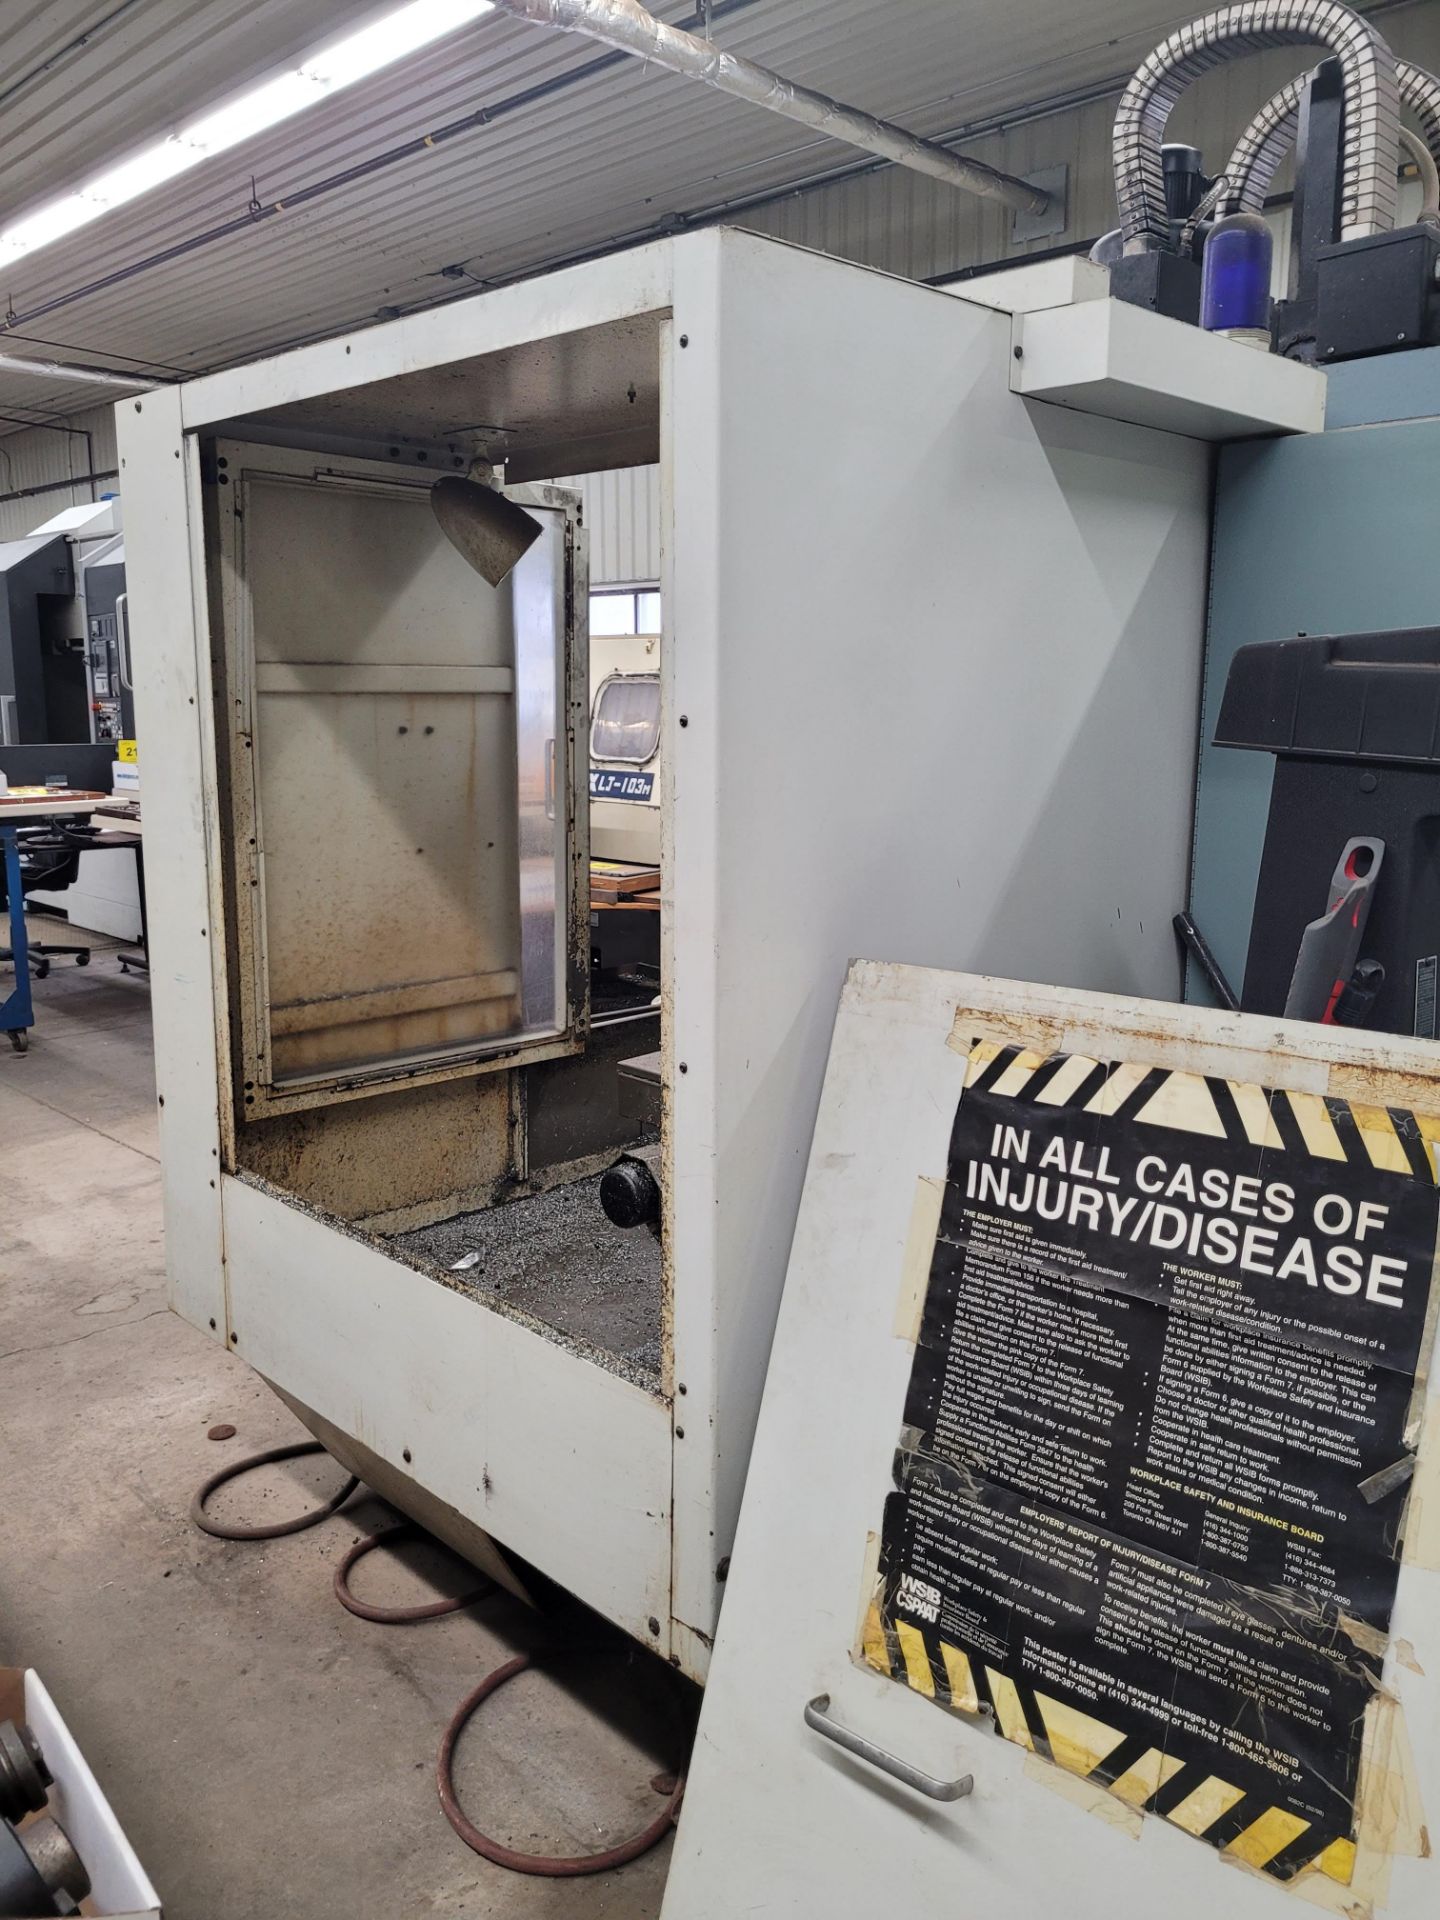 FADAL VMC4020 906-1 CNC VERTICAL MACHINING CENTER, CNC CONTROL, 10,000 RPM SPINDLE, 47.9” X 20” - Image 7 of 7